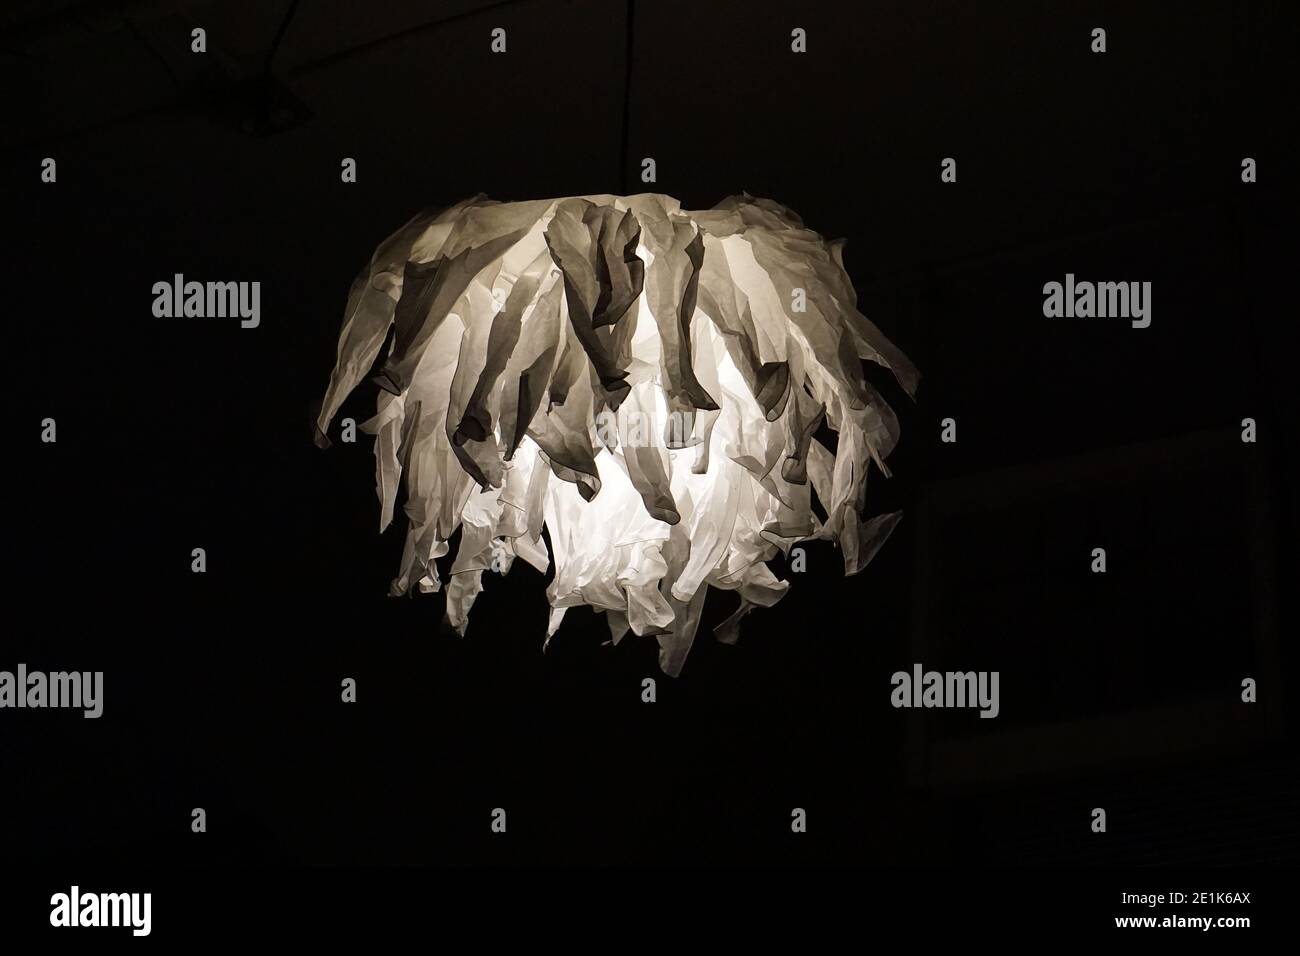 Krusning pendant paper lamp from IKEA, creatively into strips and crumpled for a unique effect. Low budget home decorating idea Stock Photo - Alamy